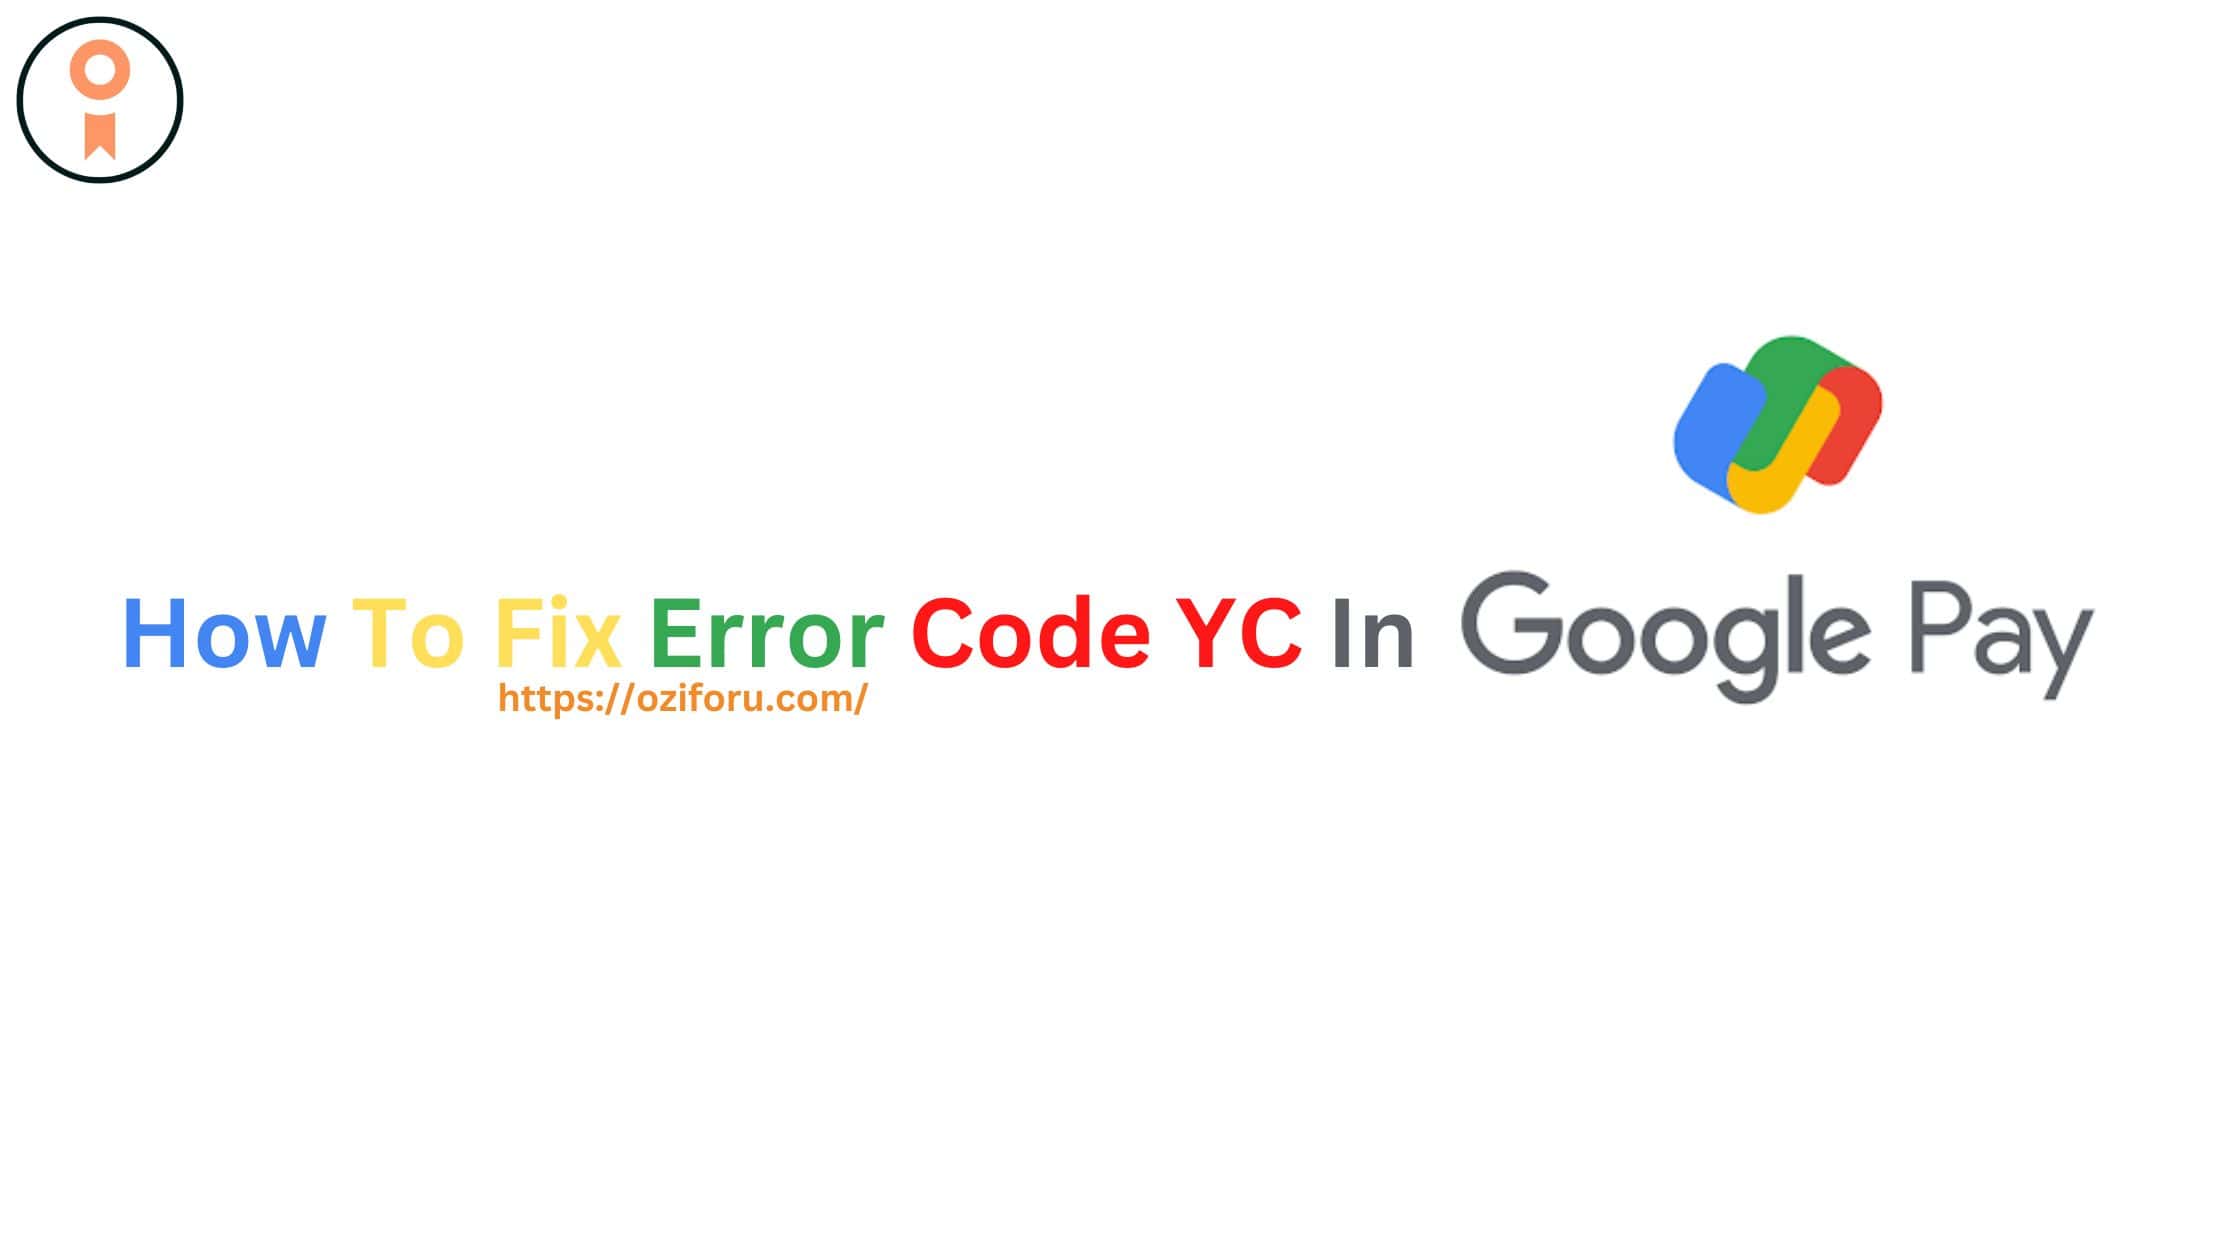 How To Fix Error Code YC In Google Pay